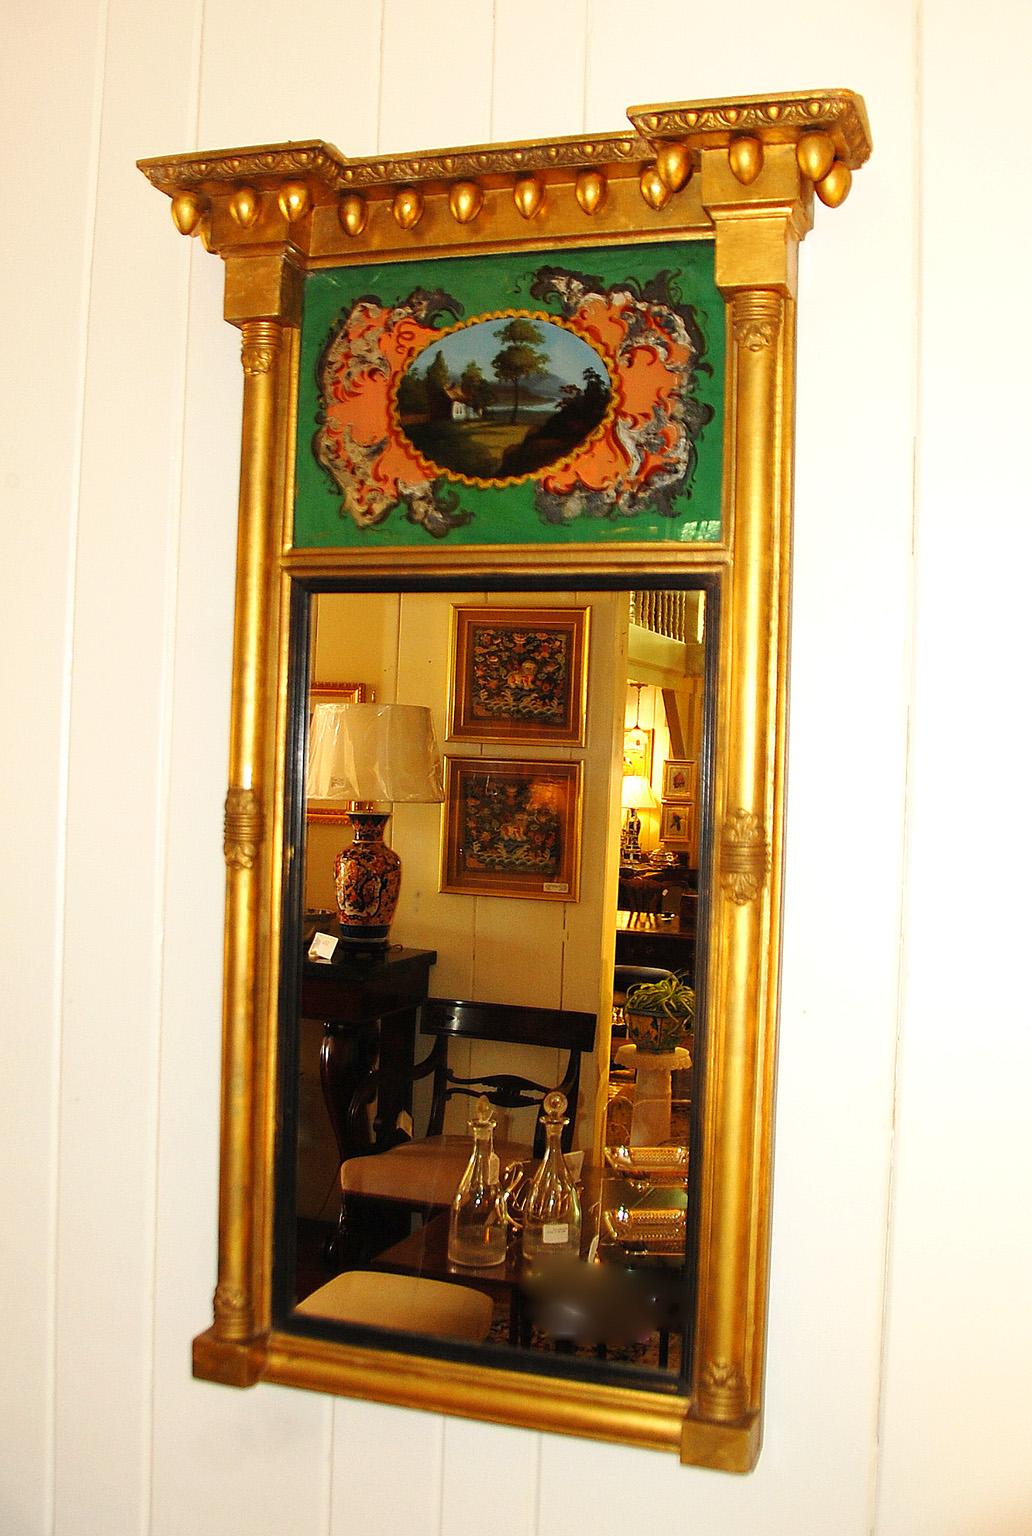 American federal period eglomise gold leaf mirror. The eglomise scene is of a cottage by a river with hills in the background in an oval, on a green ground, embellished with stylized silver acanthus leaves. There is some wear to some of the leaves,